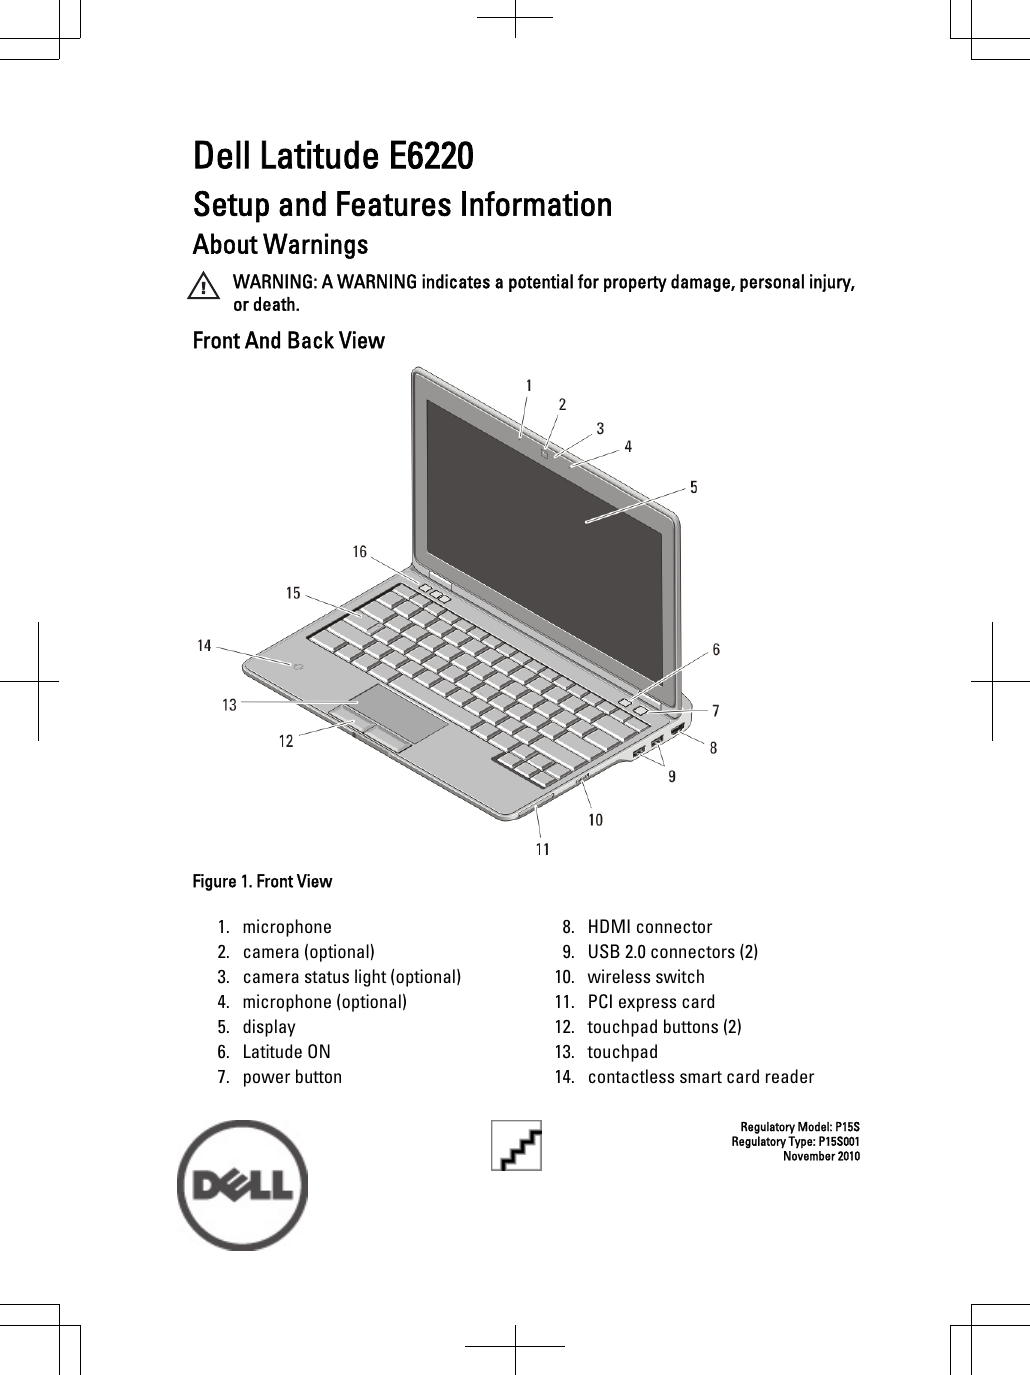 Dell Latitude E6220Setup and Features InformationAbout WarningsWARNING: A WARNING indicates a potential for property damage, personal injury,or death.Front And Back ViewFigure 1. Front View1. microphone2. camera (optional)3. camera status light (optional)4. microphone (optional)5. display6. Latitude ON7. power button8. HDMI connector9. USB 2.0 connectors (2)10. wireless switch11. PCI express card12. touchpad buttons (2)13. touchpad14. contactless smart card readerRegulatory Model: P15SRegulatory Type: P15S001November 2010